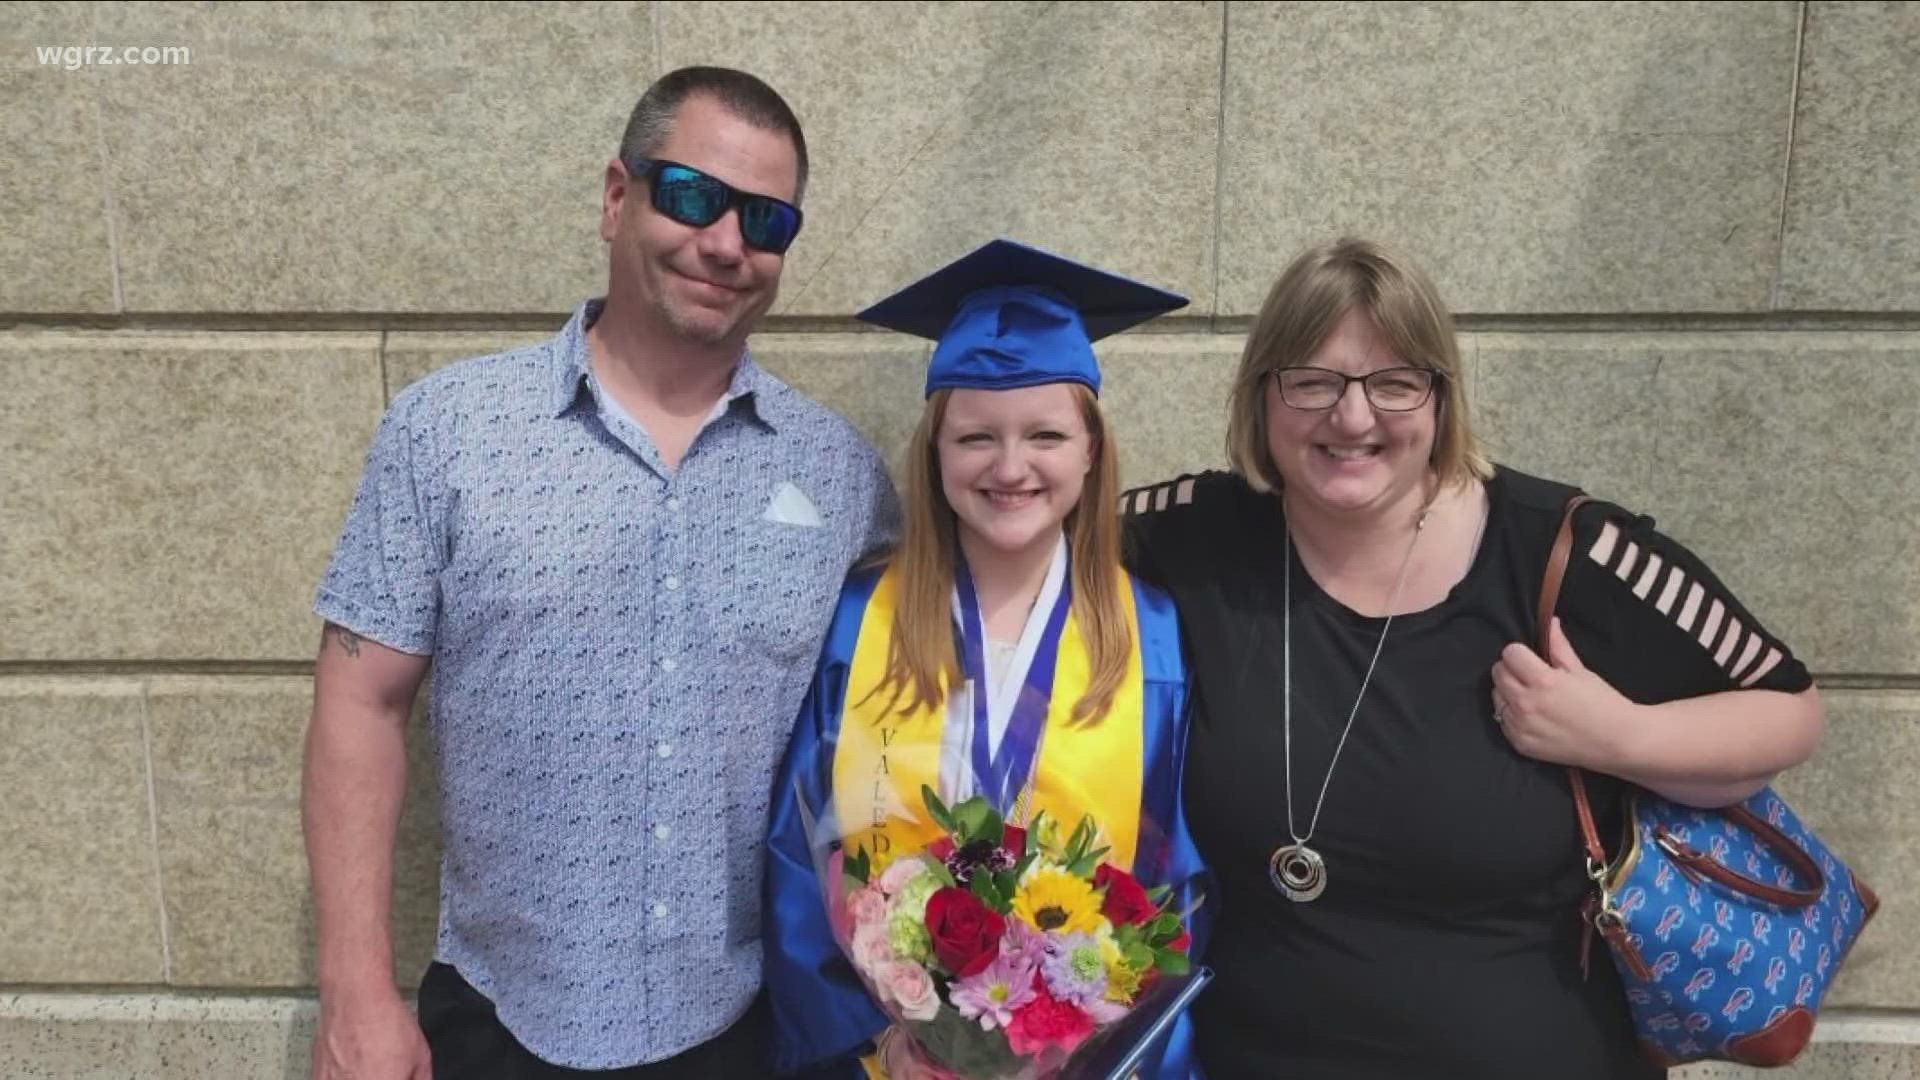 Emilie graduated from Frontier High School this spring and is headed to the University at Buffalo in the fall.